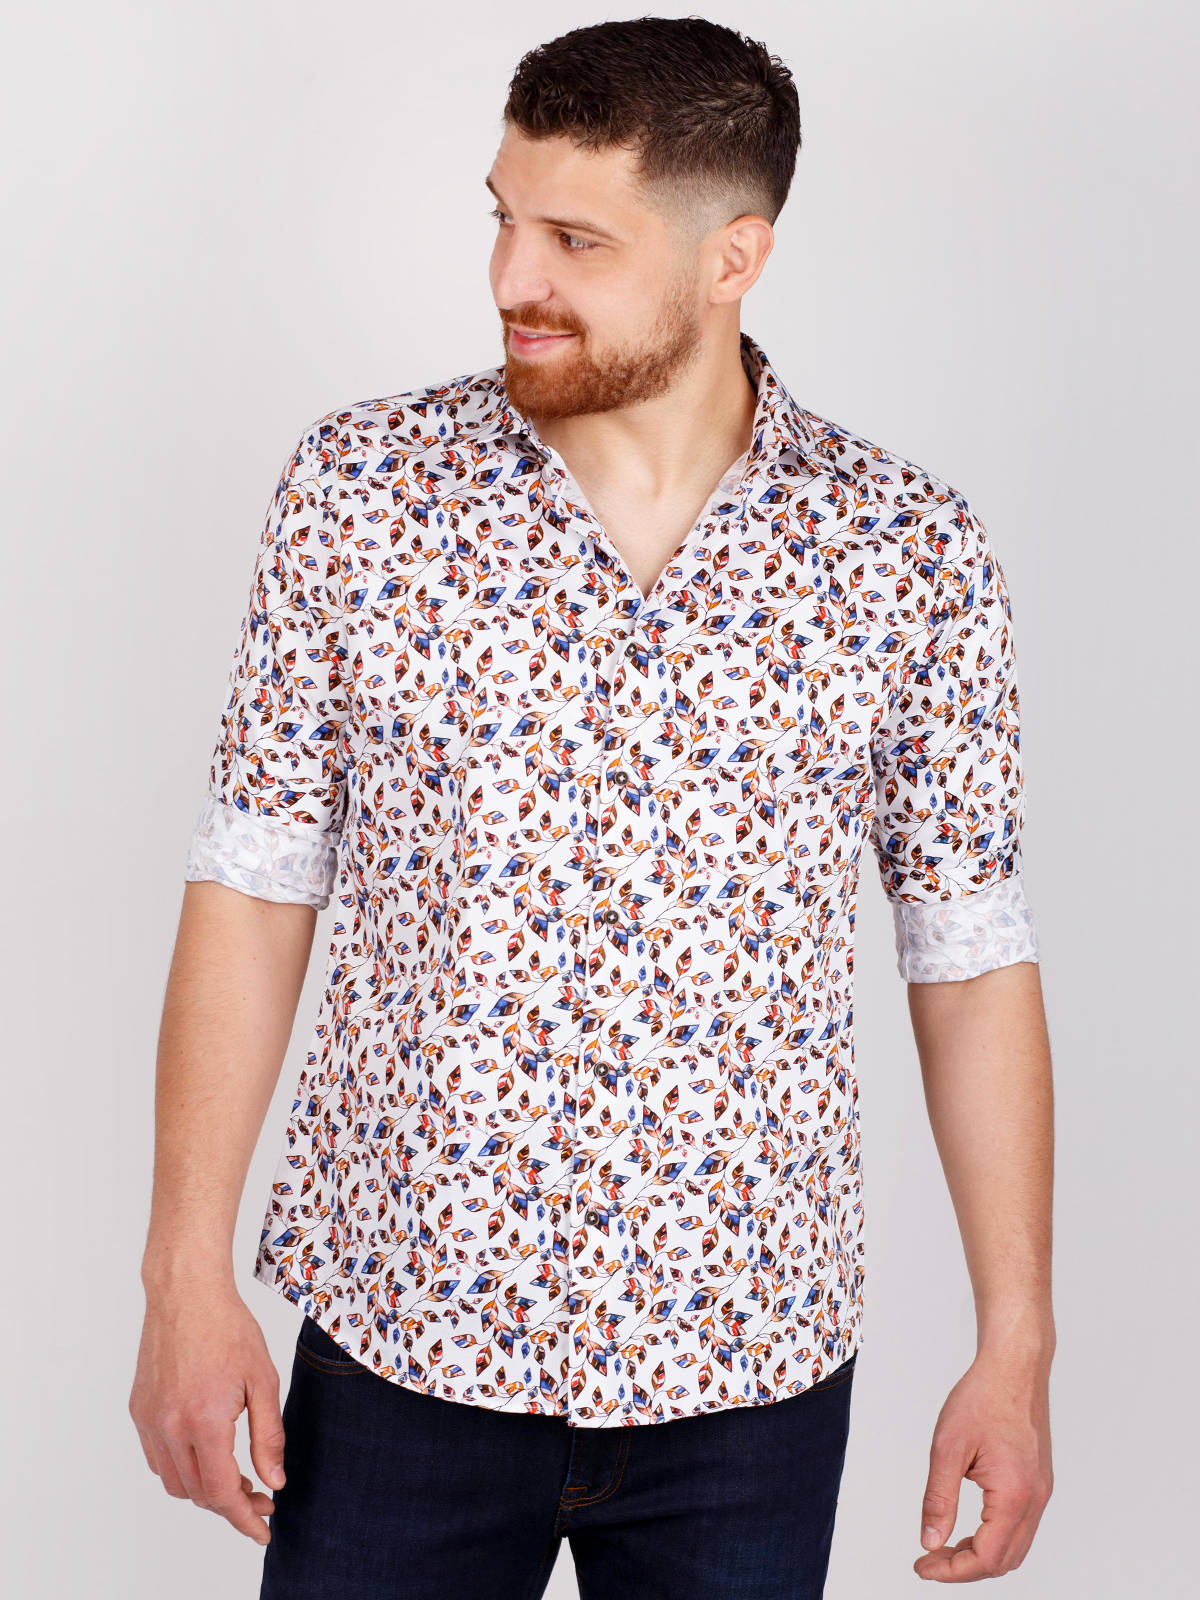 Fitted shirt with a print of colored lea - 21498 € 32.62 img3